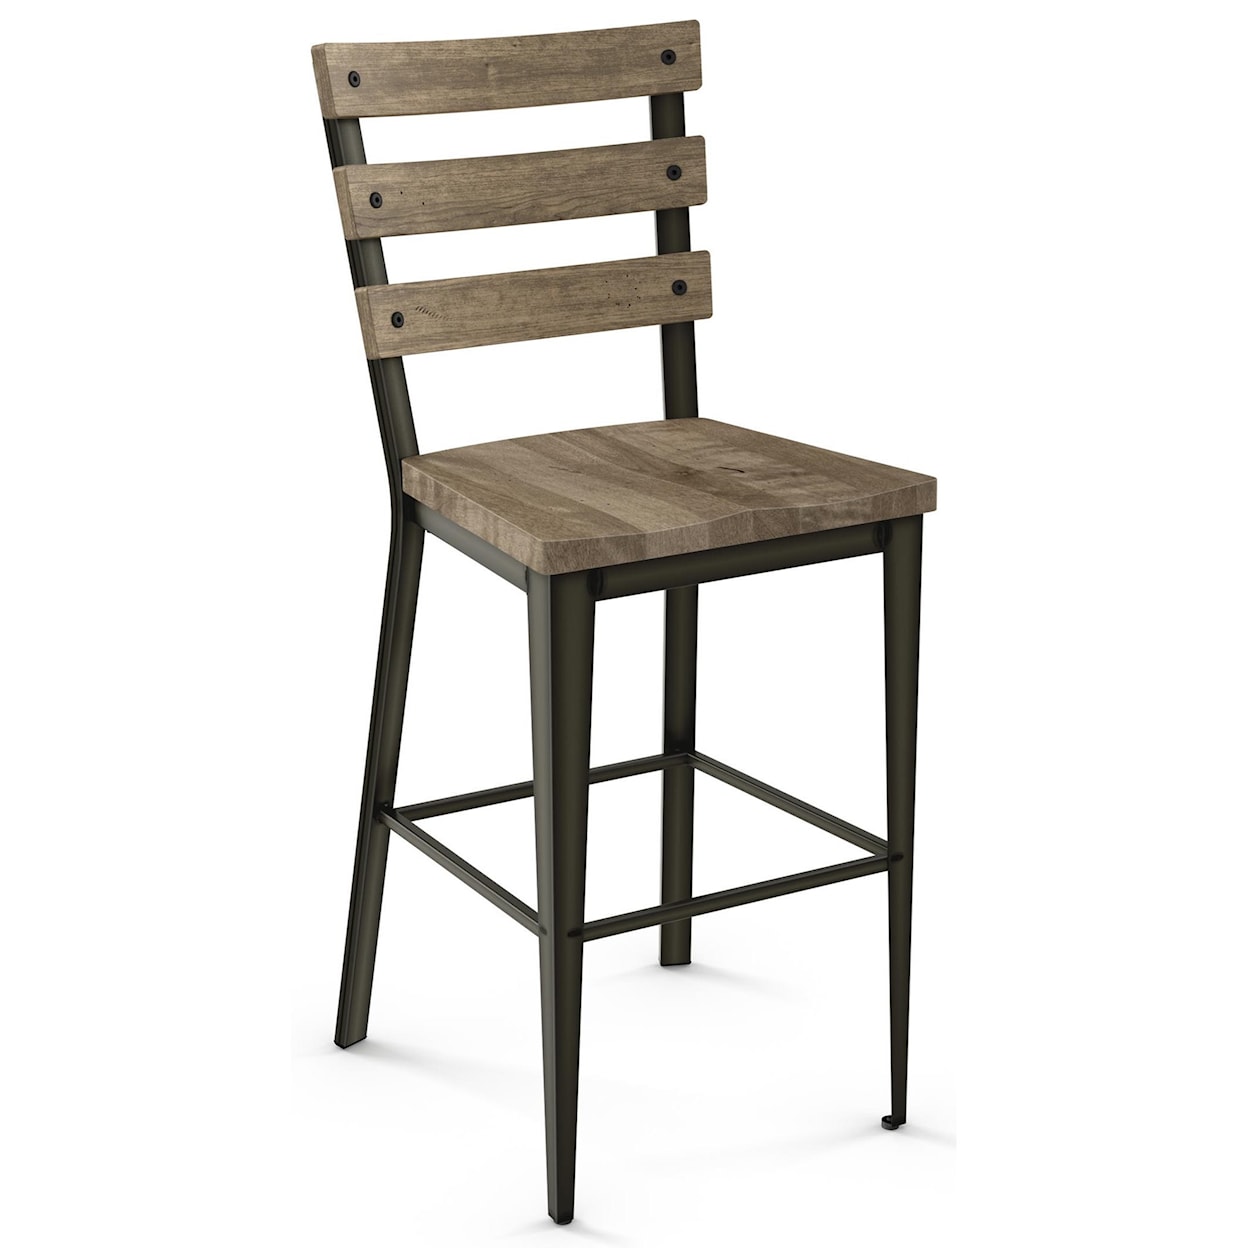 Amisco Industrial 26" Dexter Counter Stool with Wood Seat